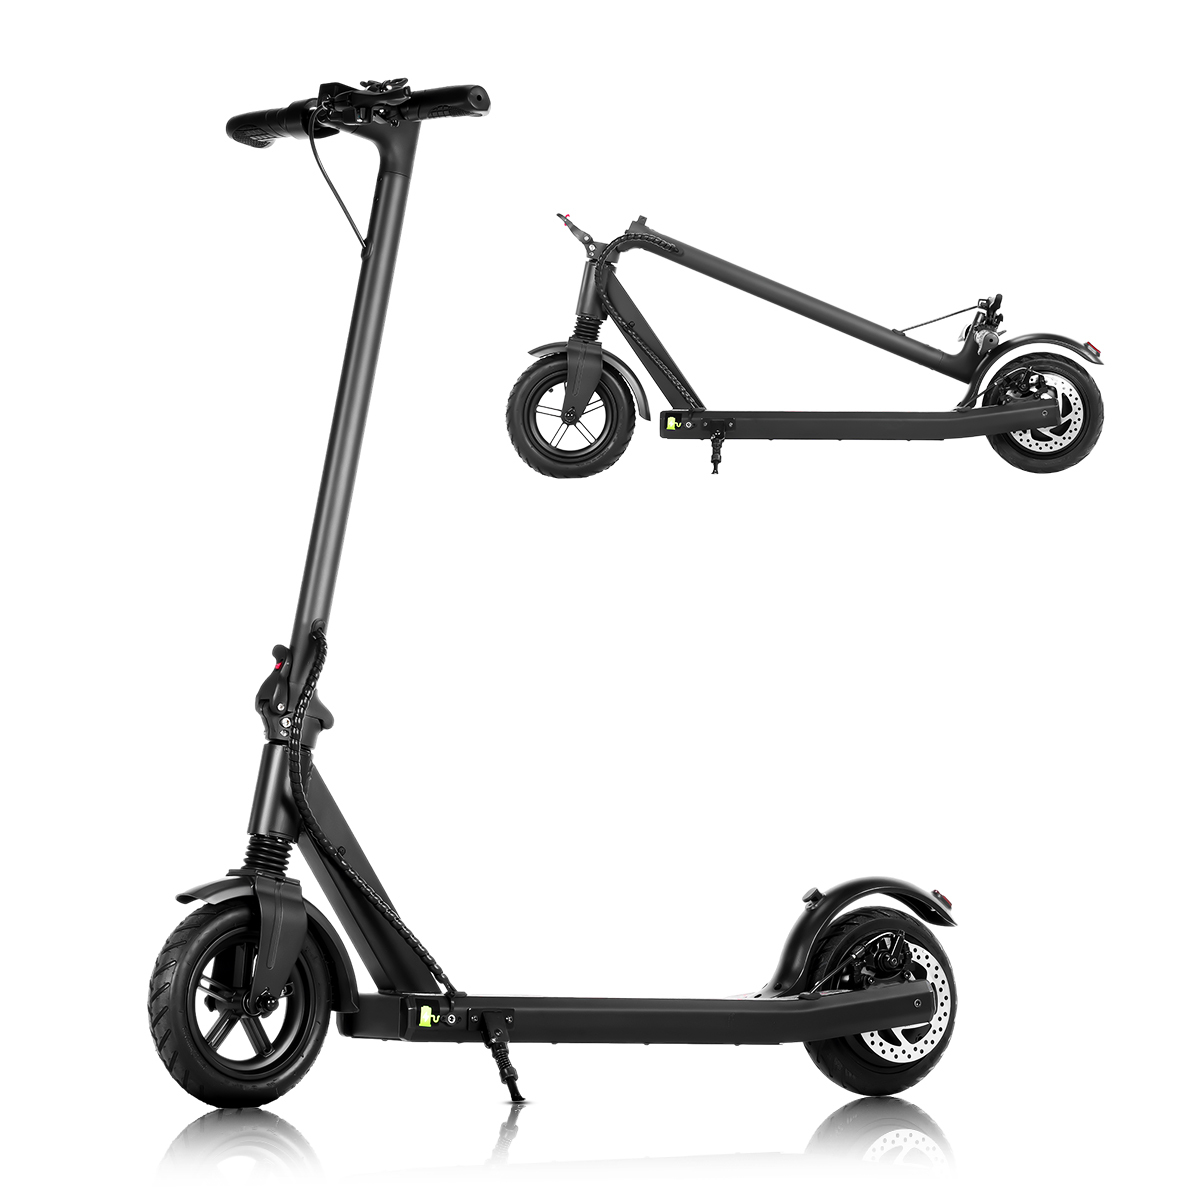 Primary image for Electric Scooter For Adults, Max 31 Miles Range, Dual Braking, Folding Commuting